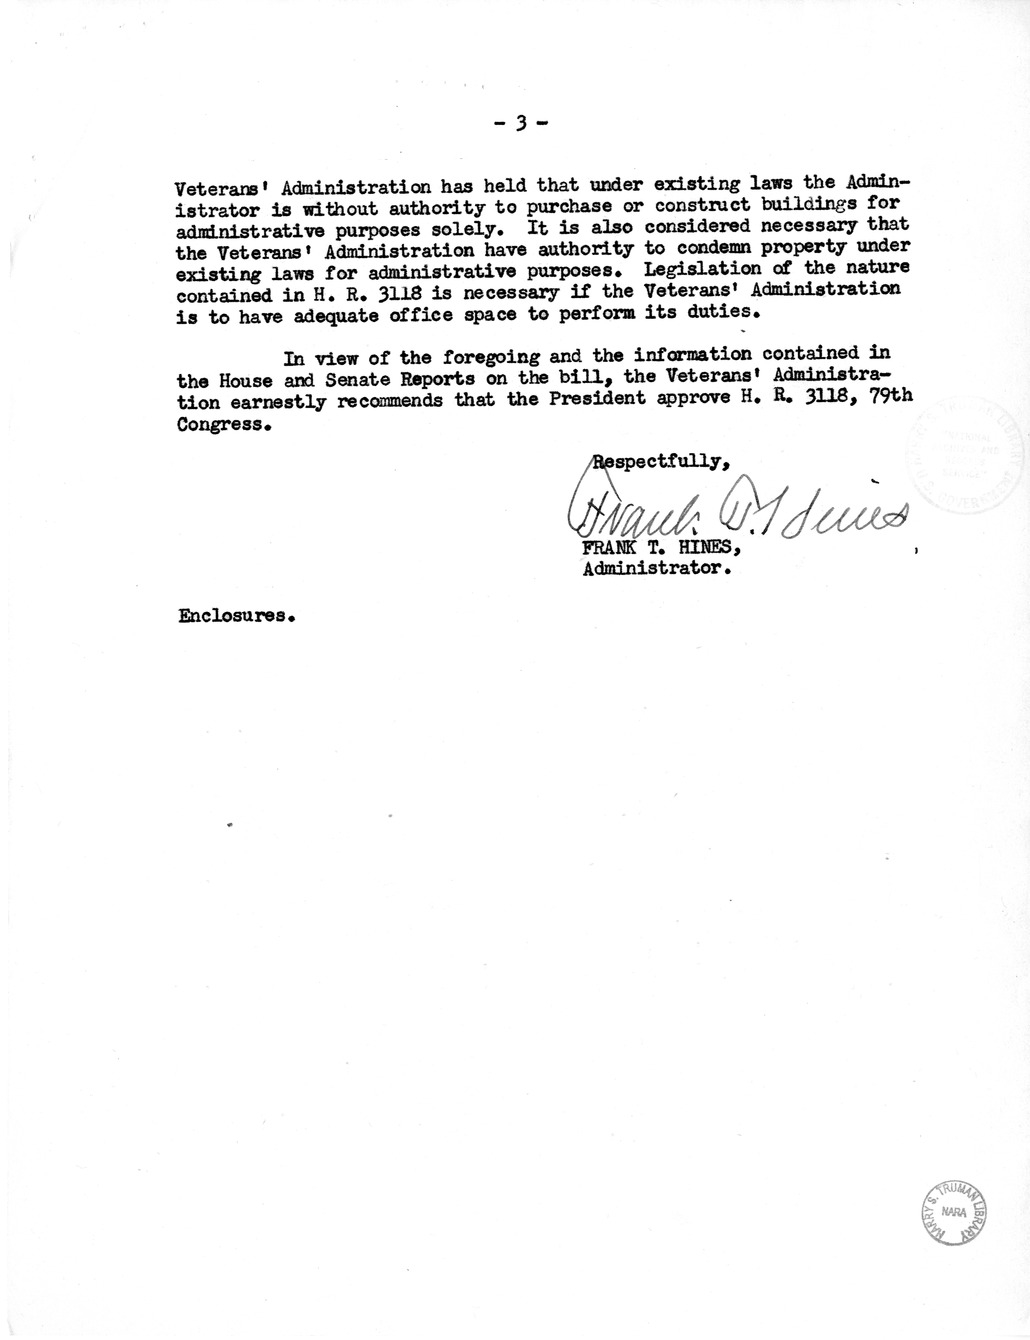 Memorandum from Harold D. Smith to M. C. Latta, H.R. 3118, To Amend Section 100 of Public Law 346, Seventieth-Eighth Congress, June 22, 1944, to Grant Certain Priorities to the Veterans' Administration, with Attachments